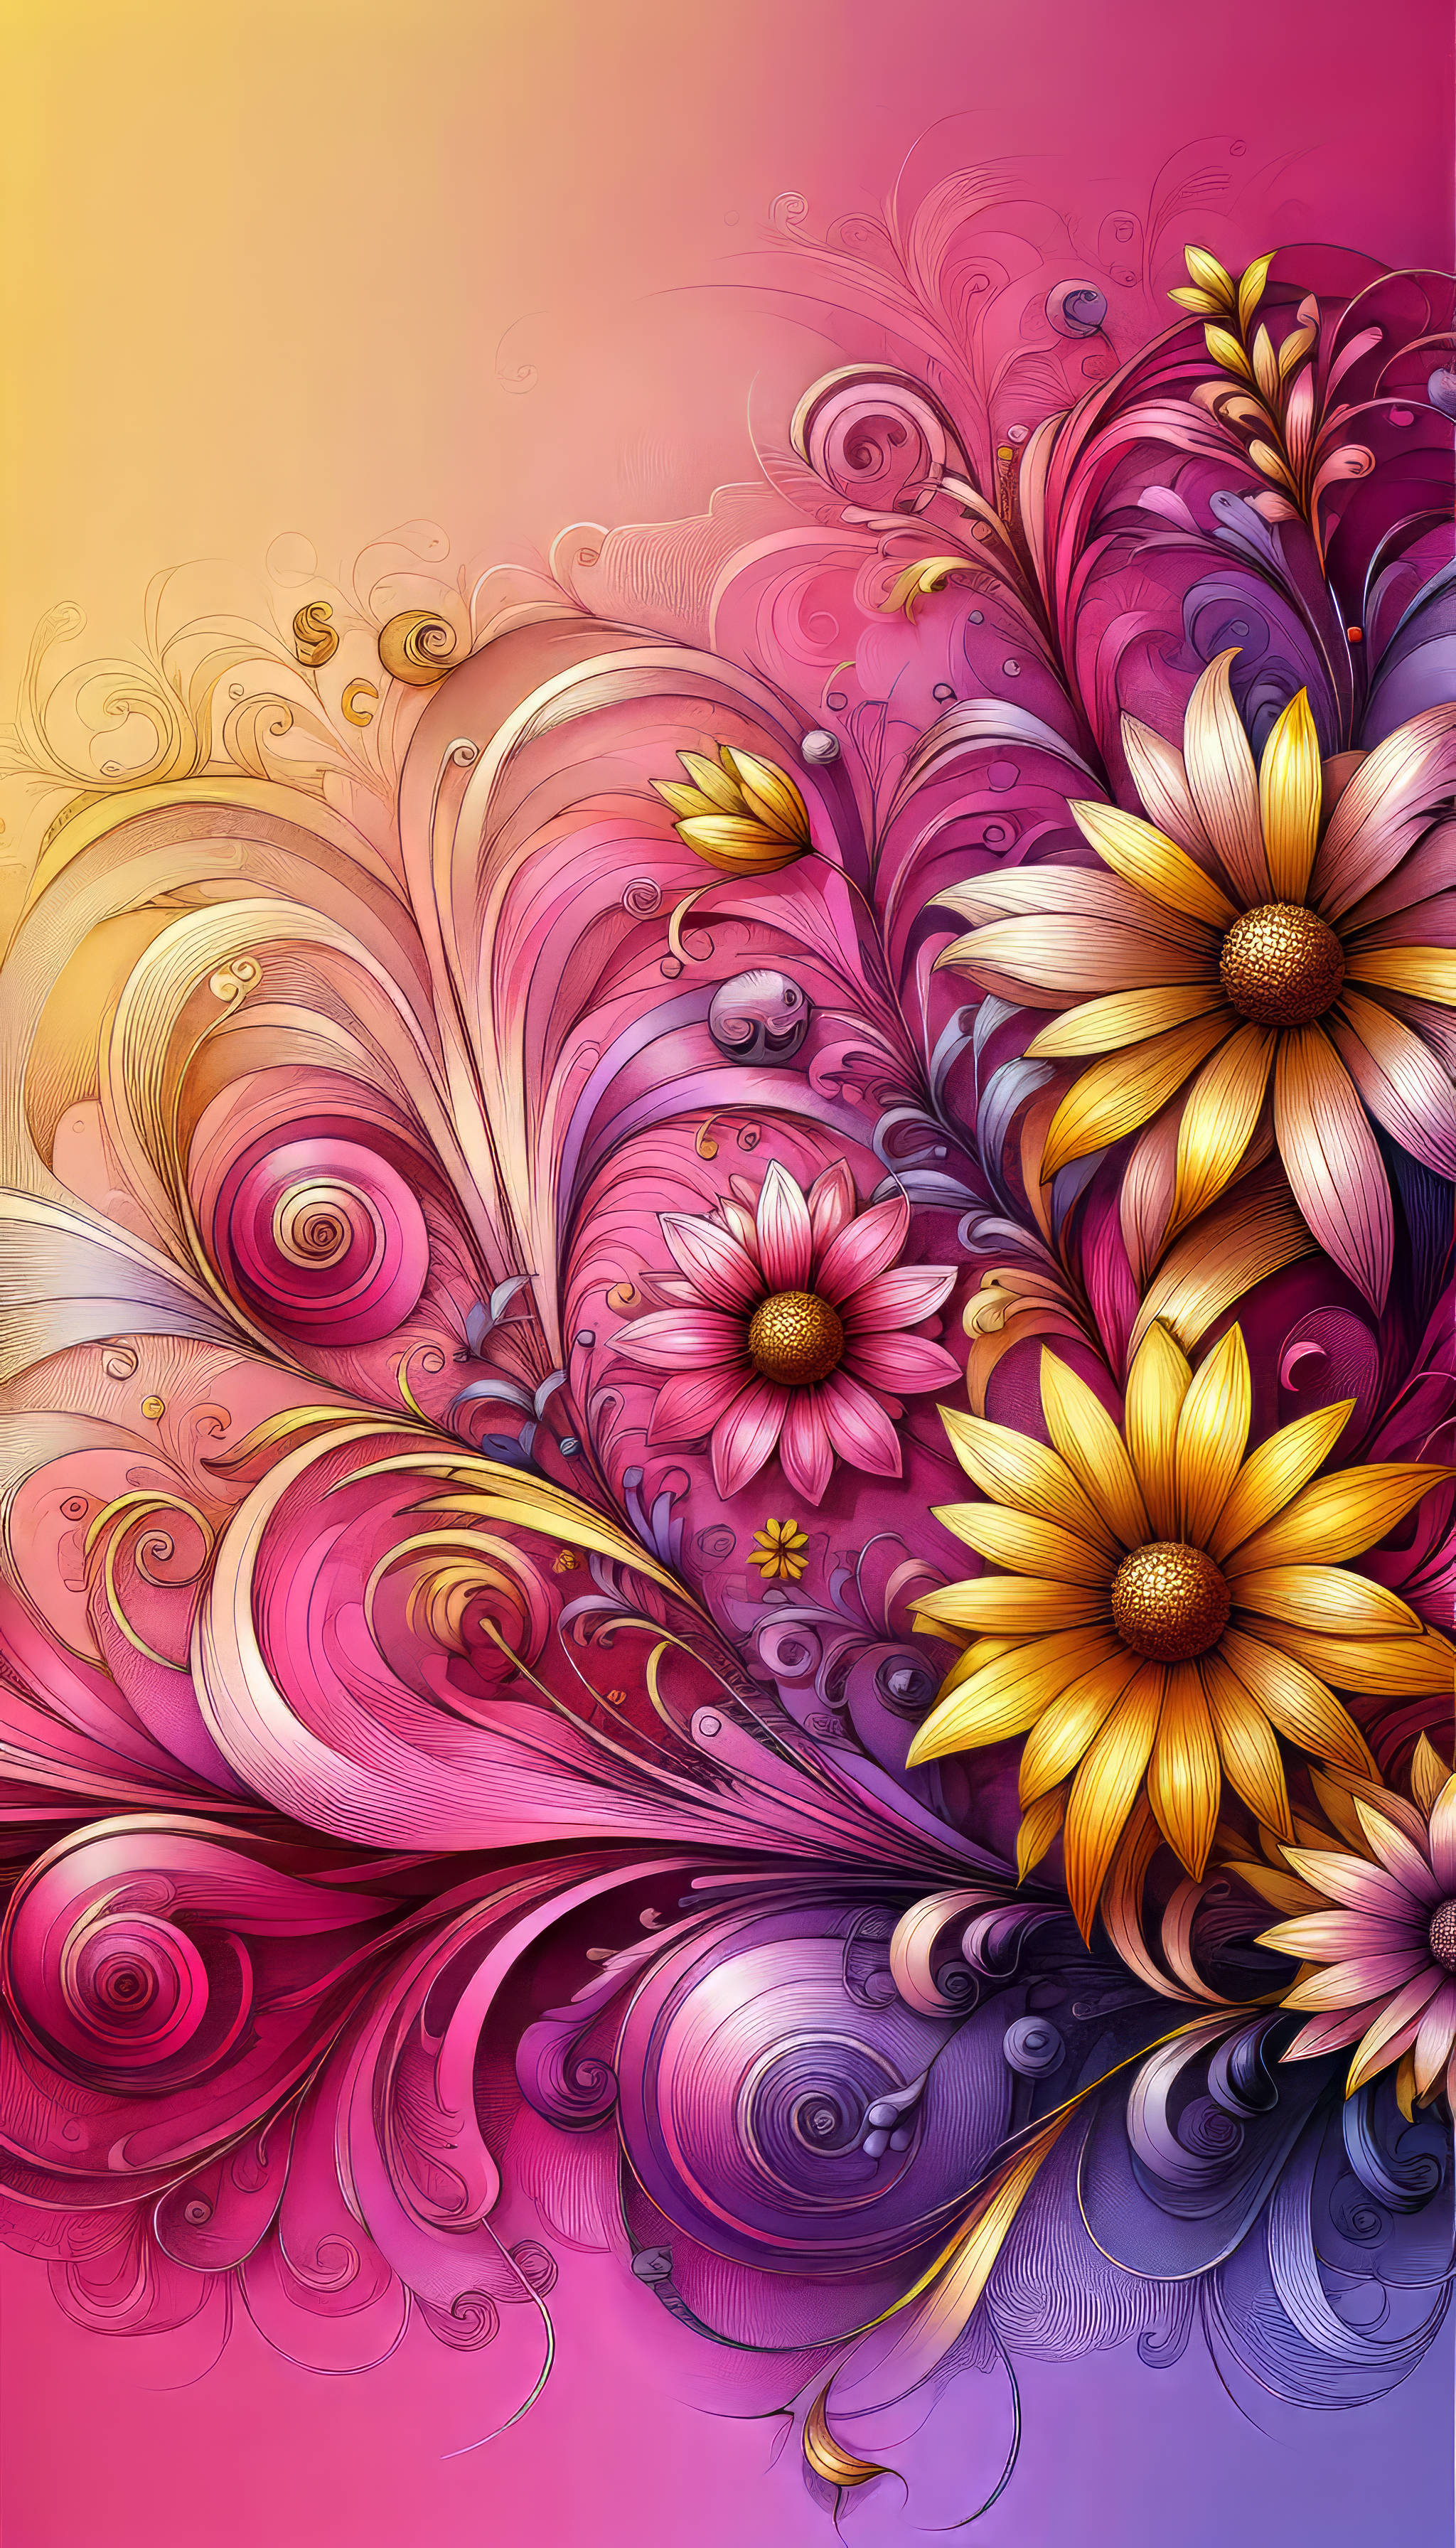 Artistic phone wallpaper featuring stylized yellow flowers with swirl patterns on a gradient pink and purple background.